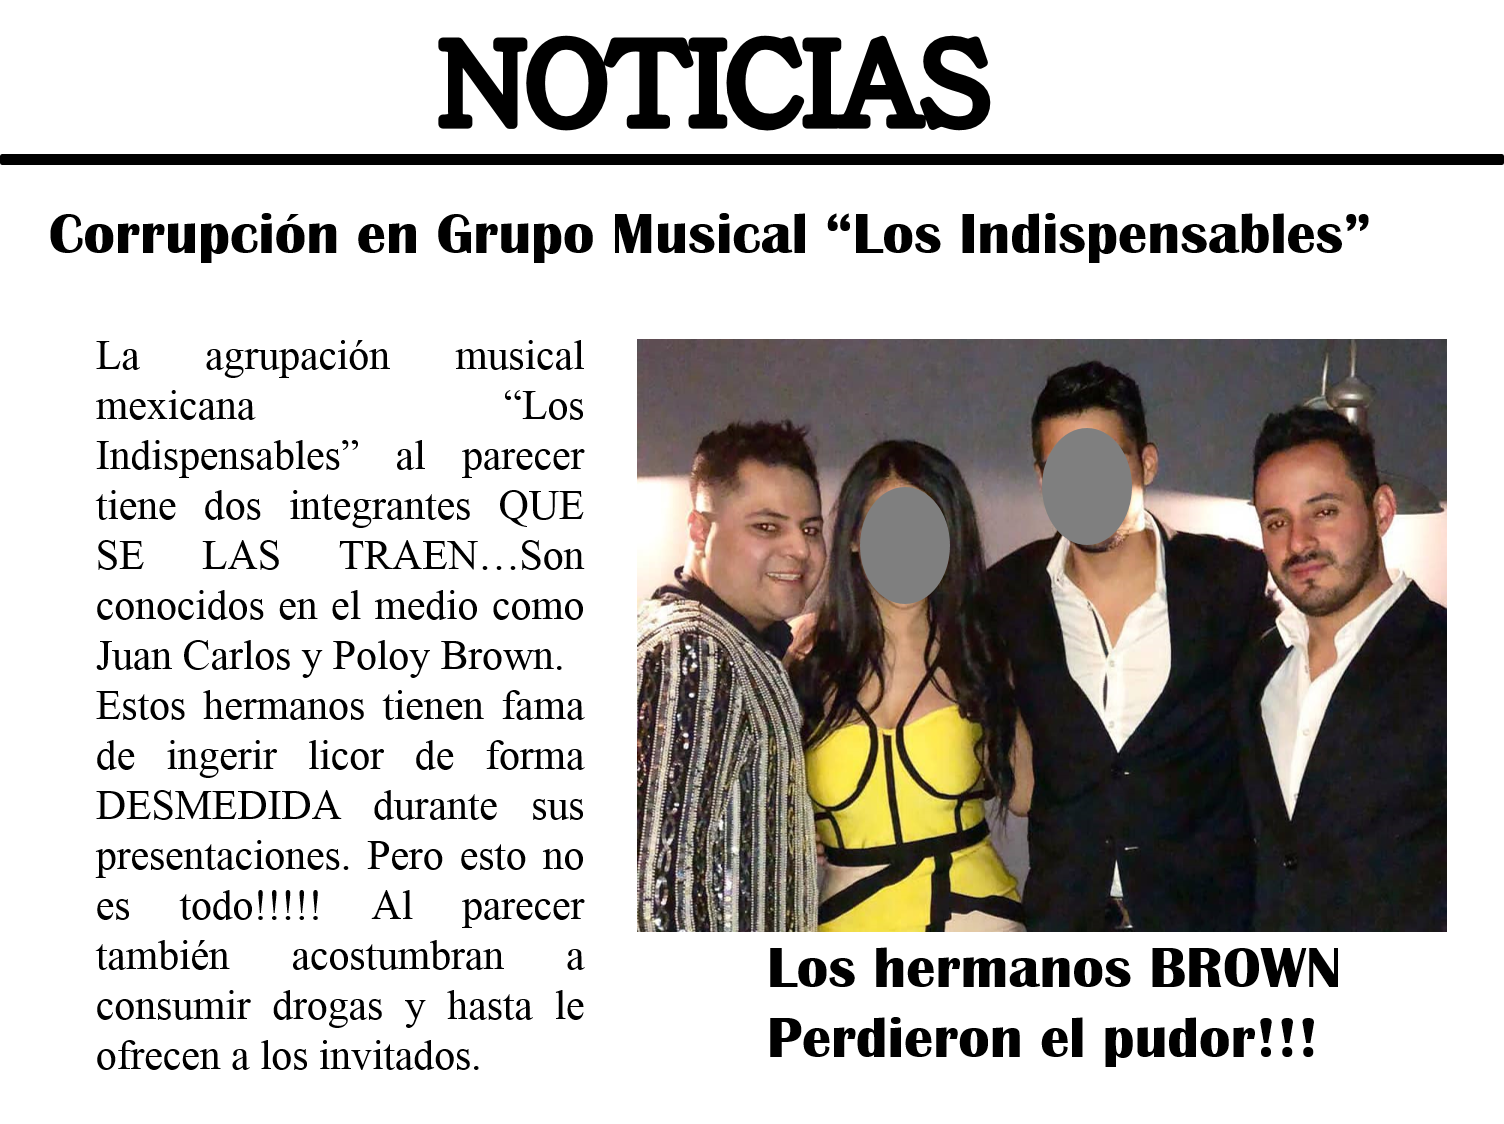 poloy brown, los indispensables grupo musical